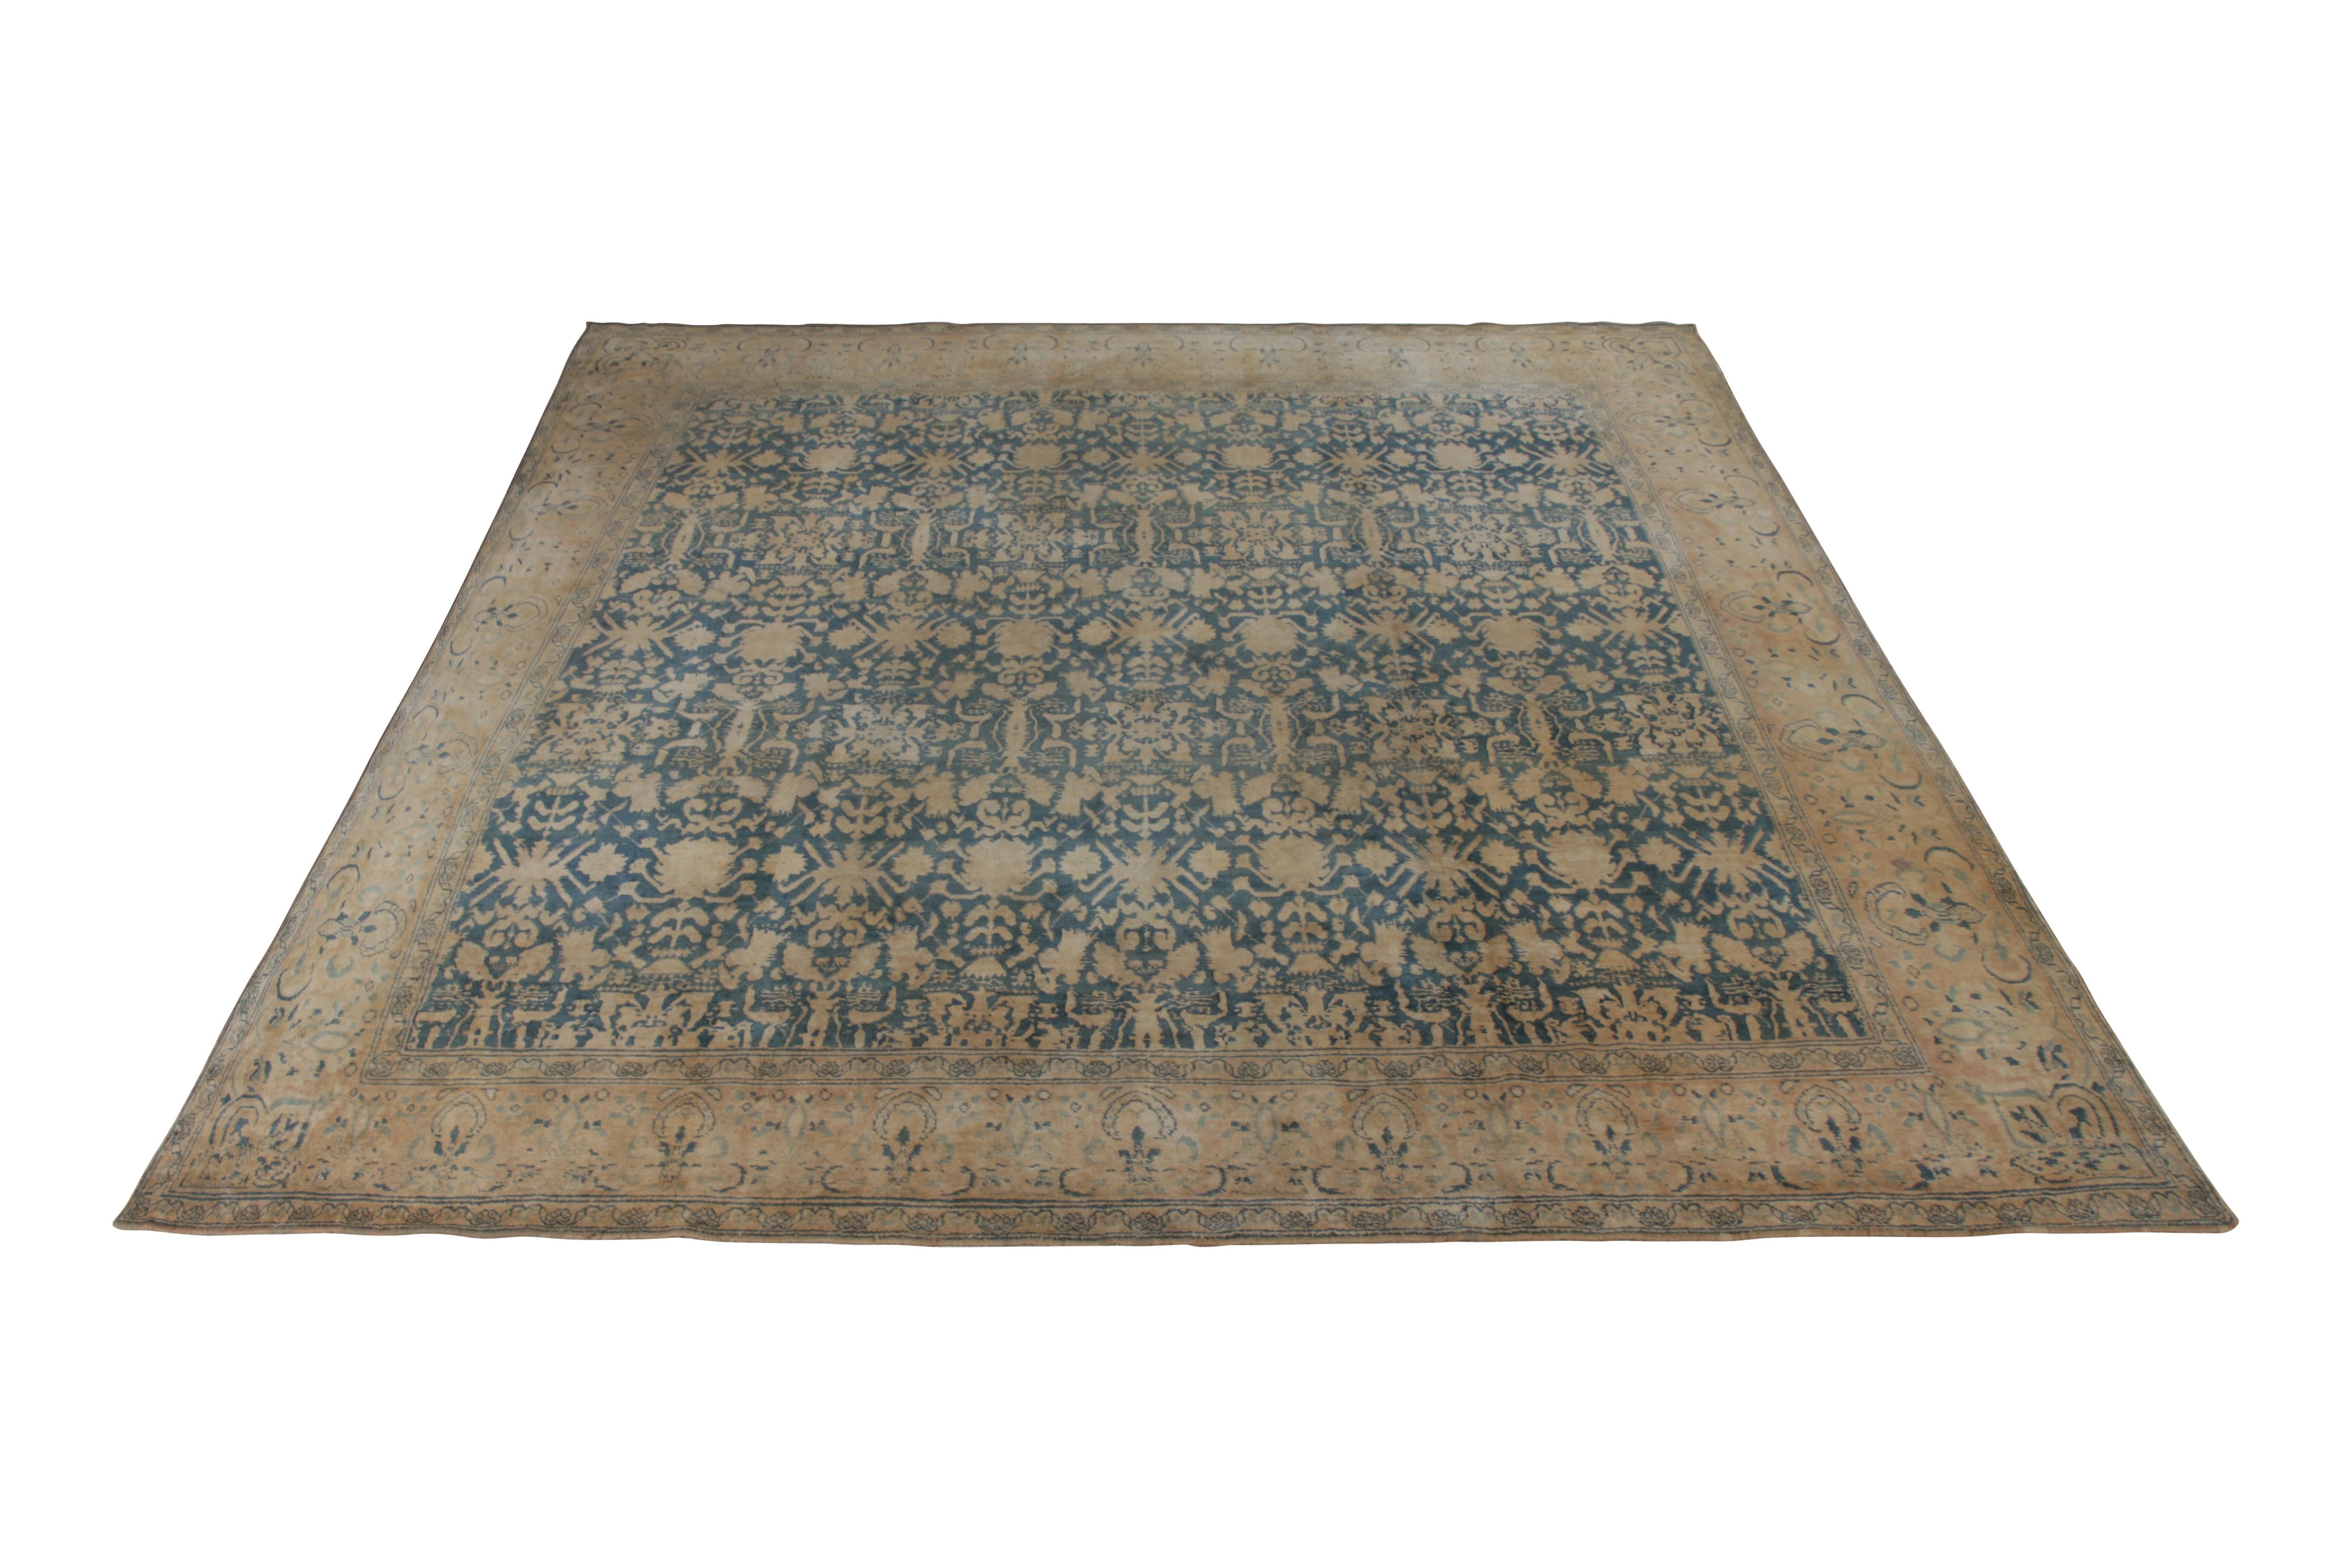 An antique 13x13 Agra rug in beige and blue, hand knotted in all cotton originating from India circa 1910-1920. A time-honored lineage, often notably used by the Maharajas of India for their homes in the summer. 

Further on the design: An accent